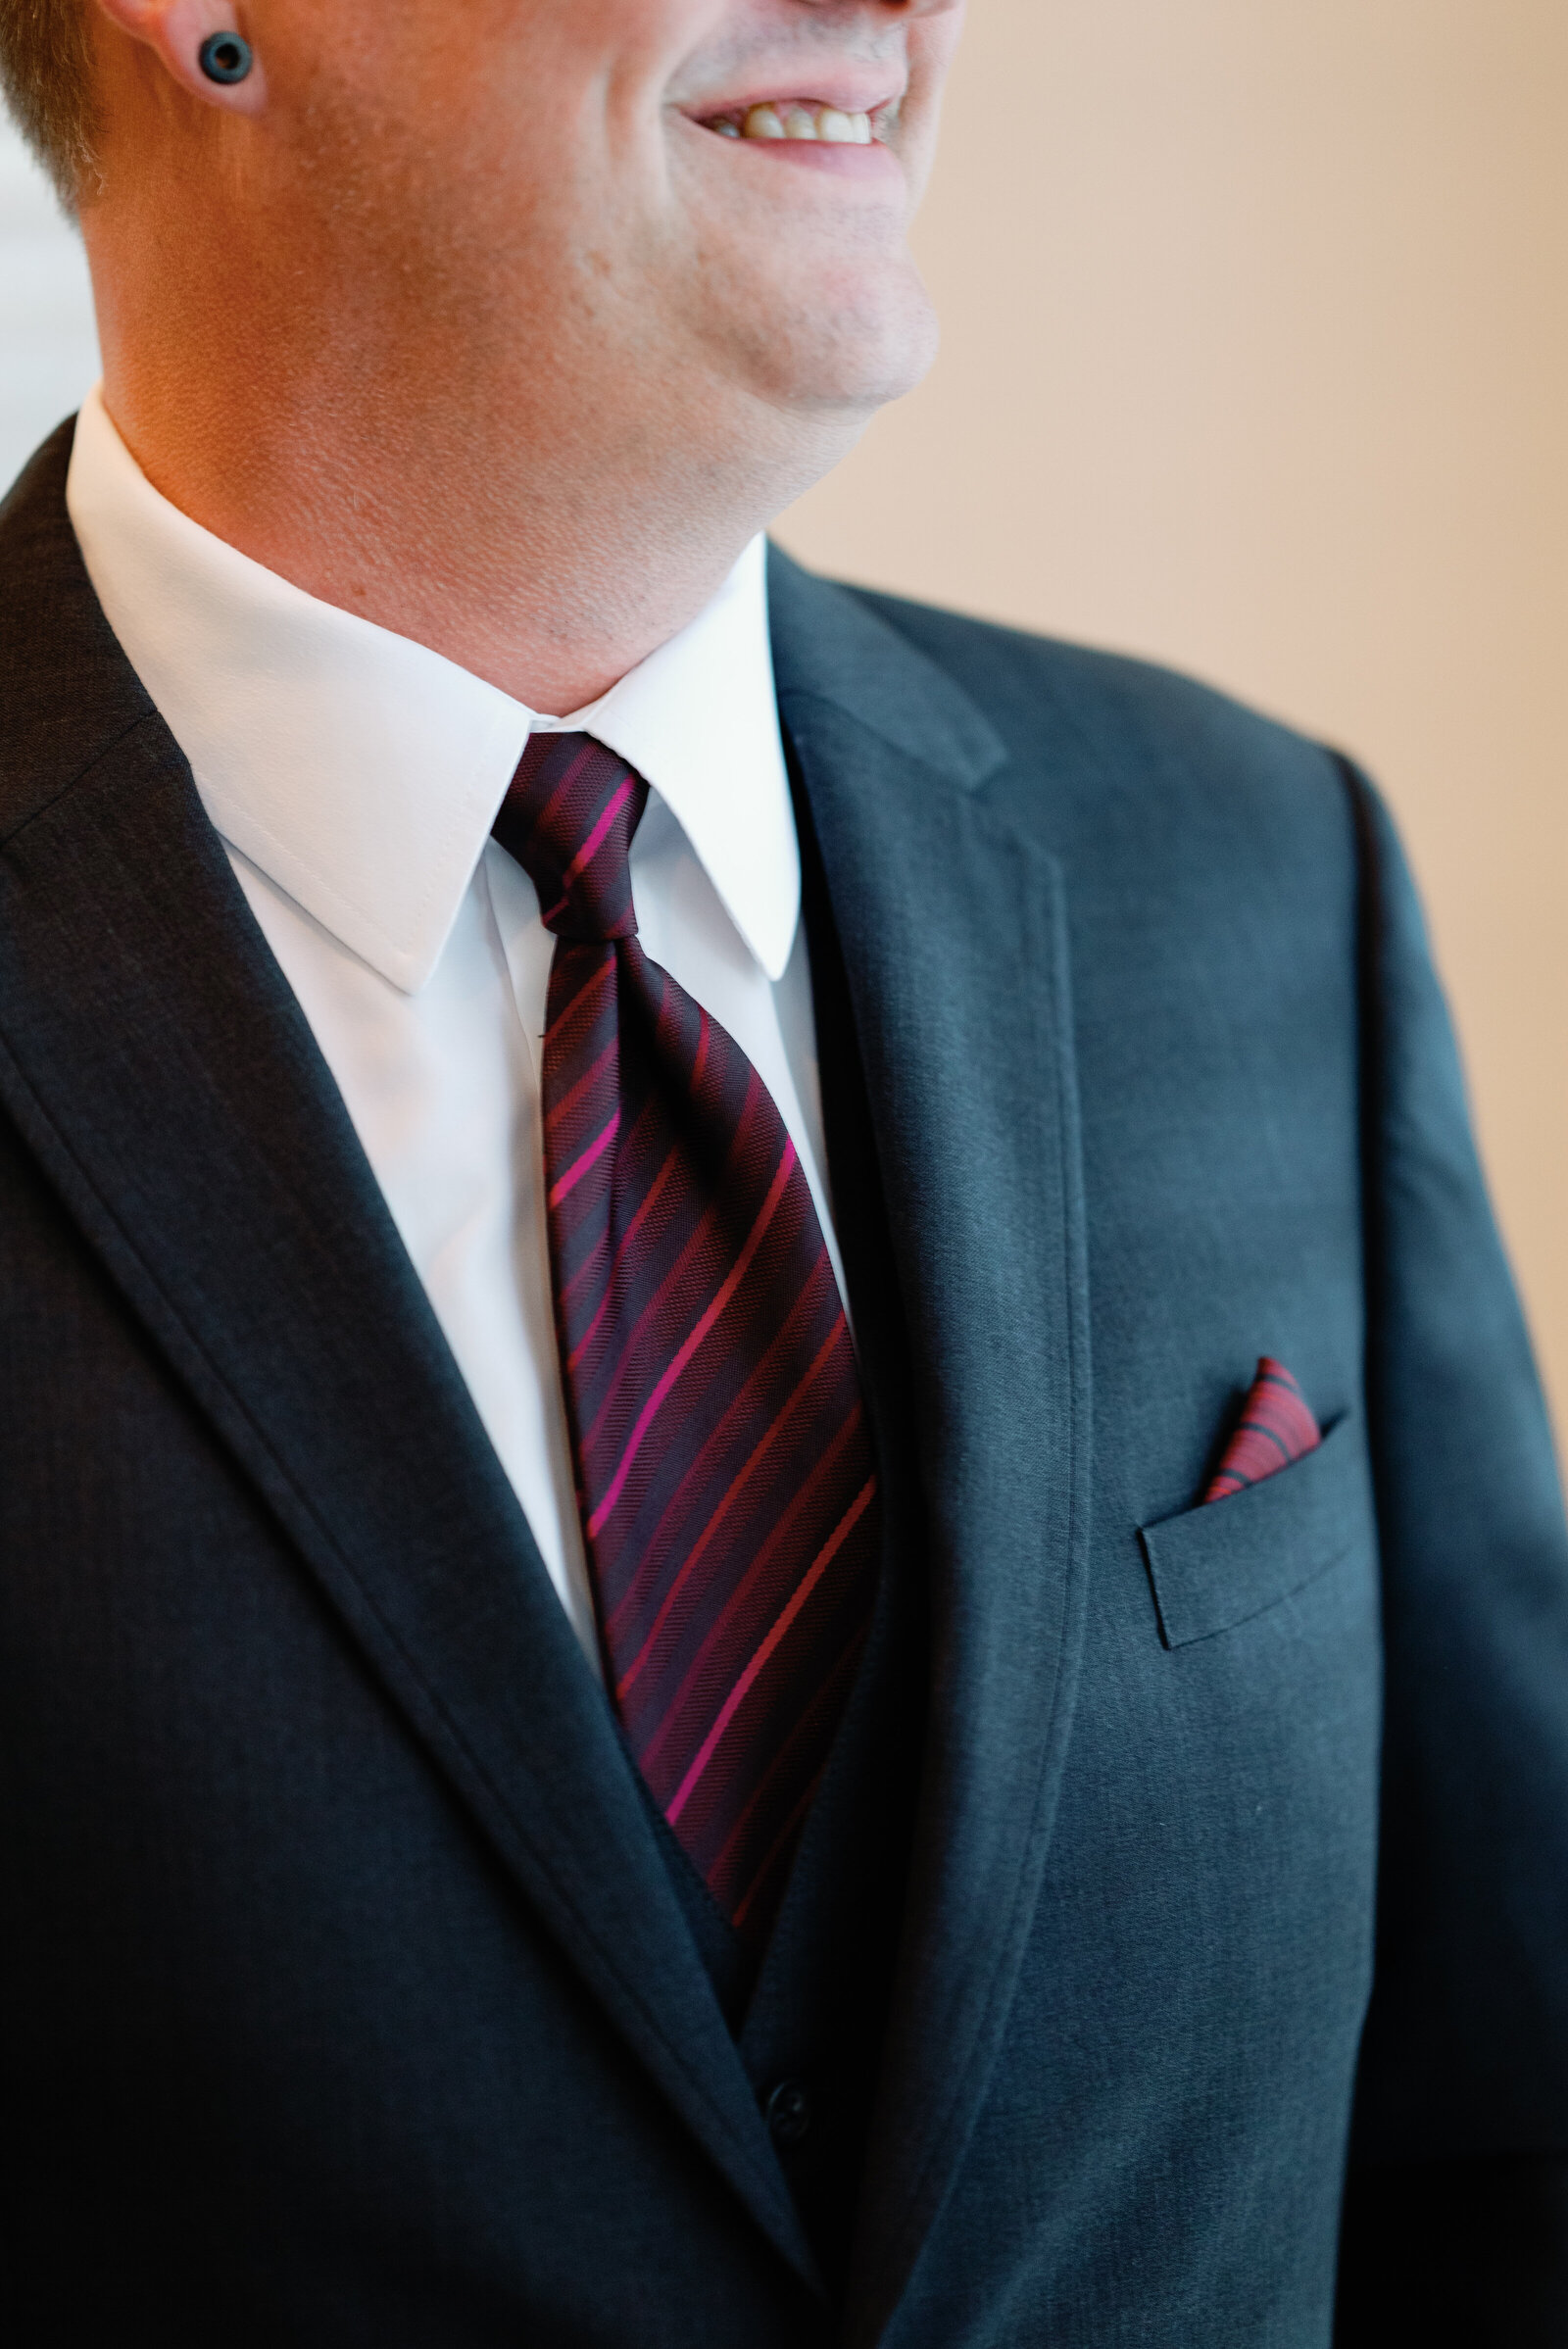 detail of grooms tie and usit jacket pocket square. Can also see his mouth smiling